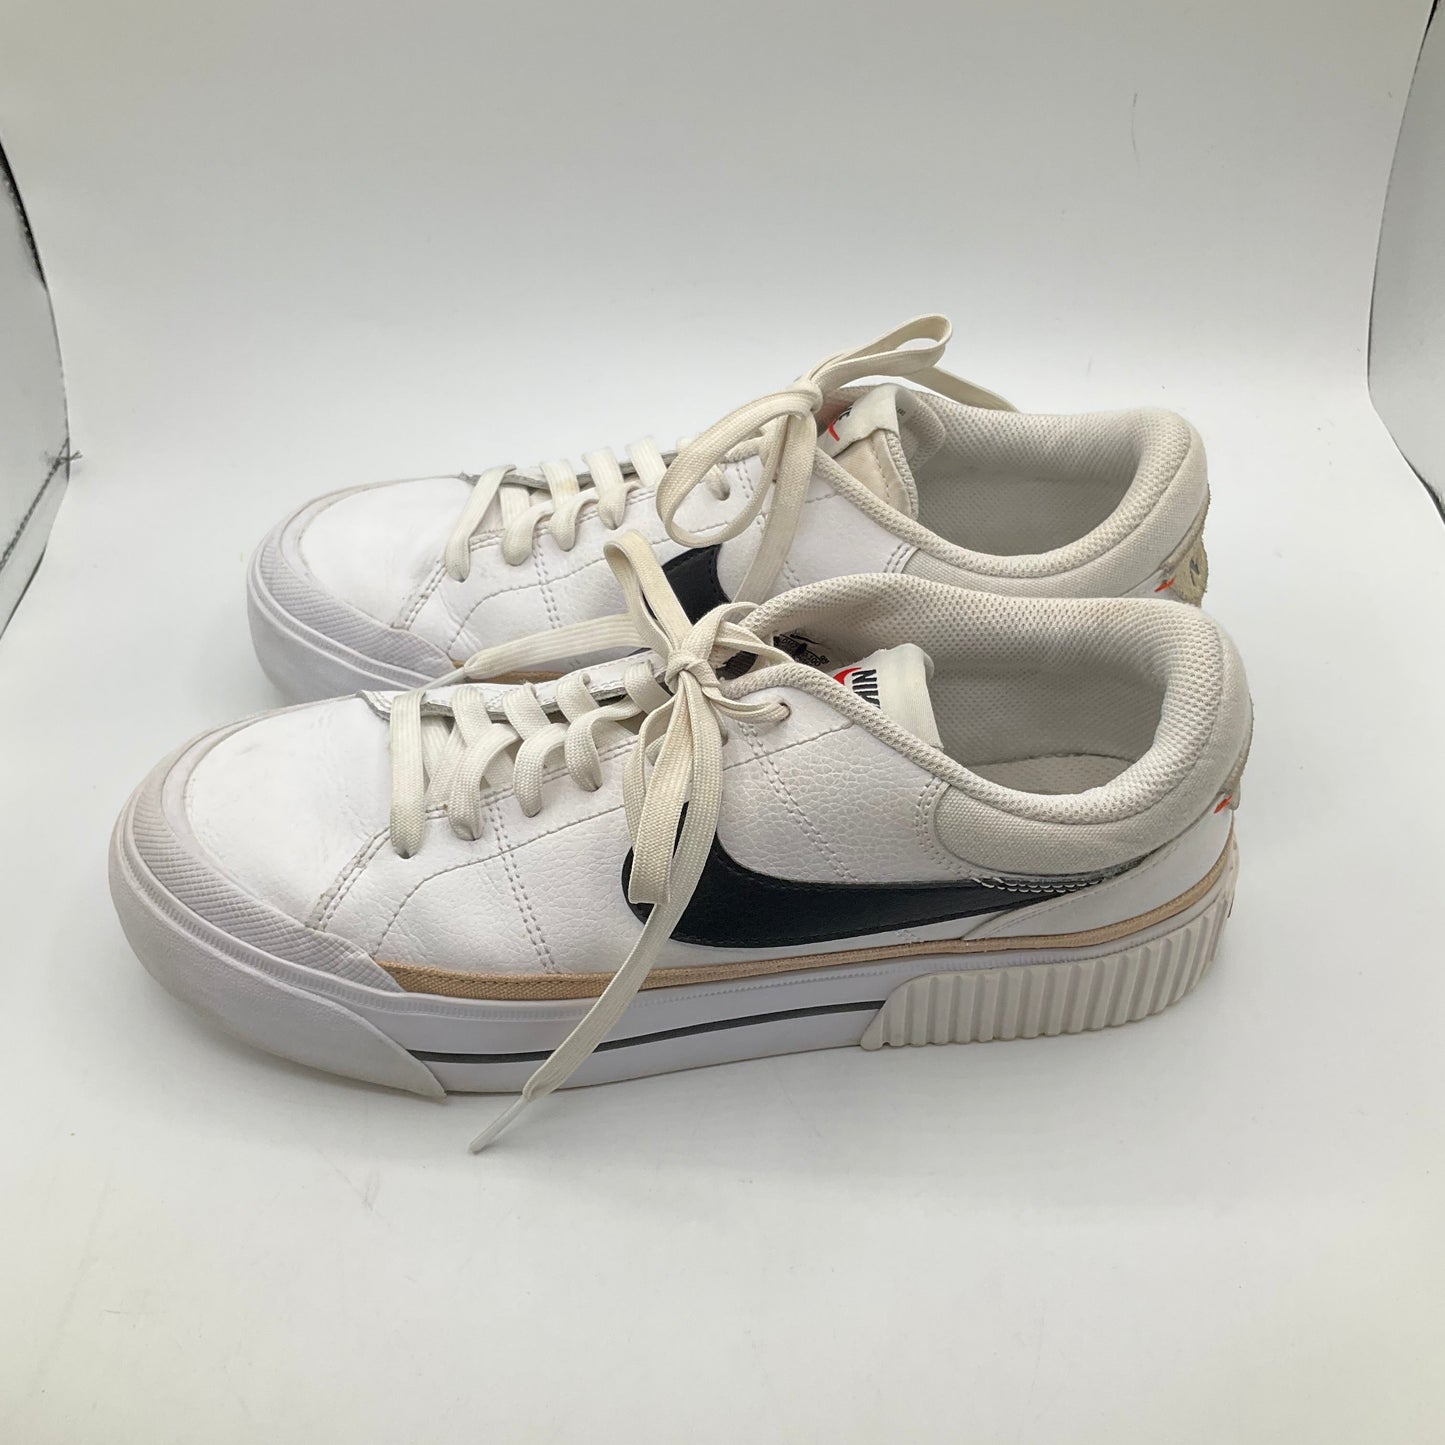 White Shoes Sneakers Nike, Size 10